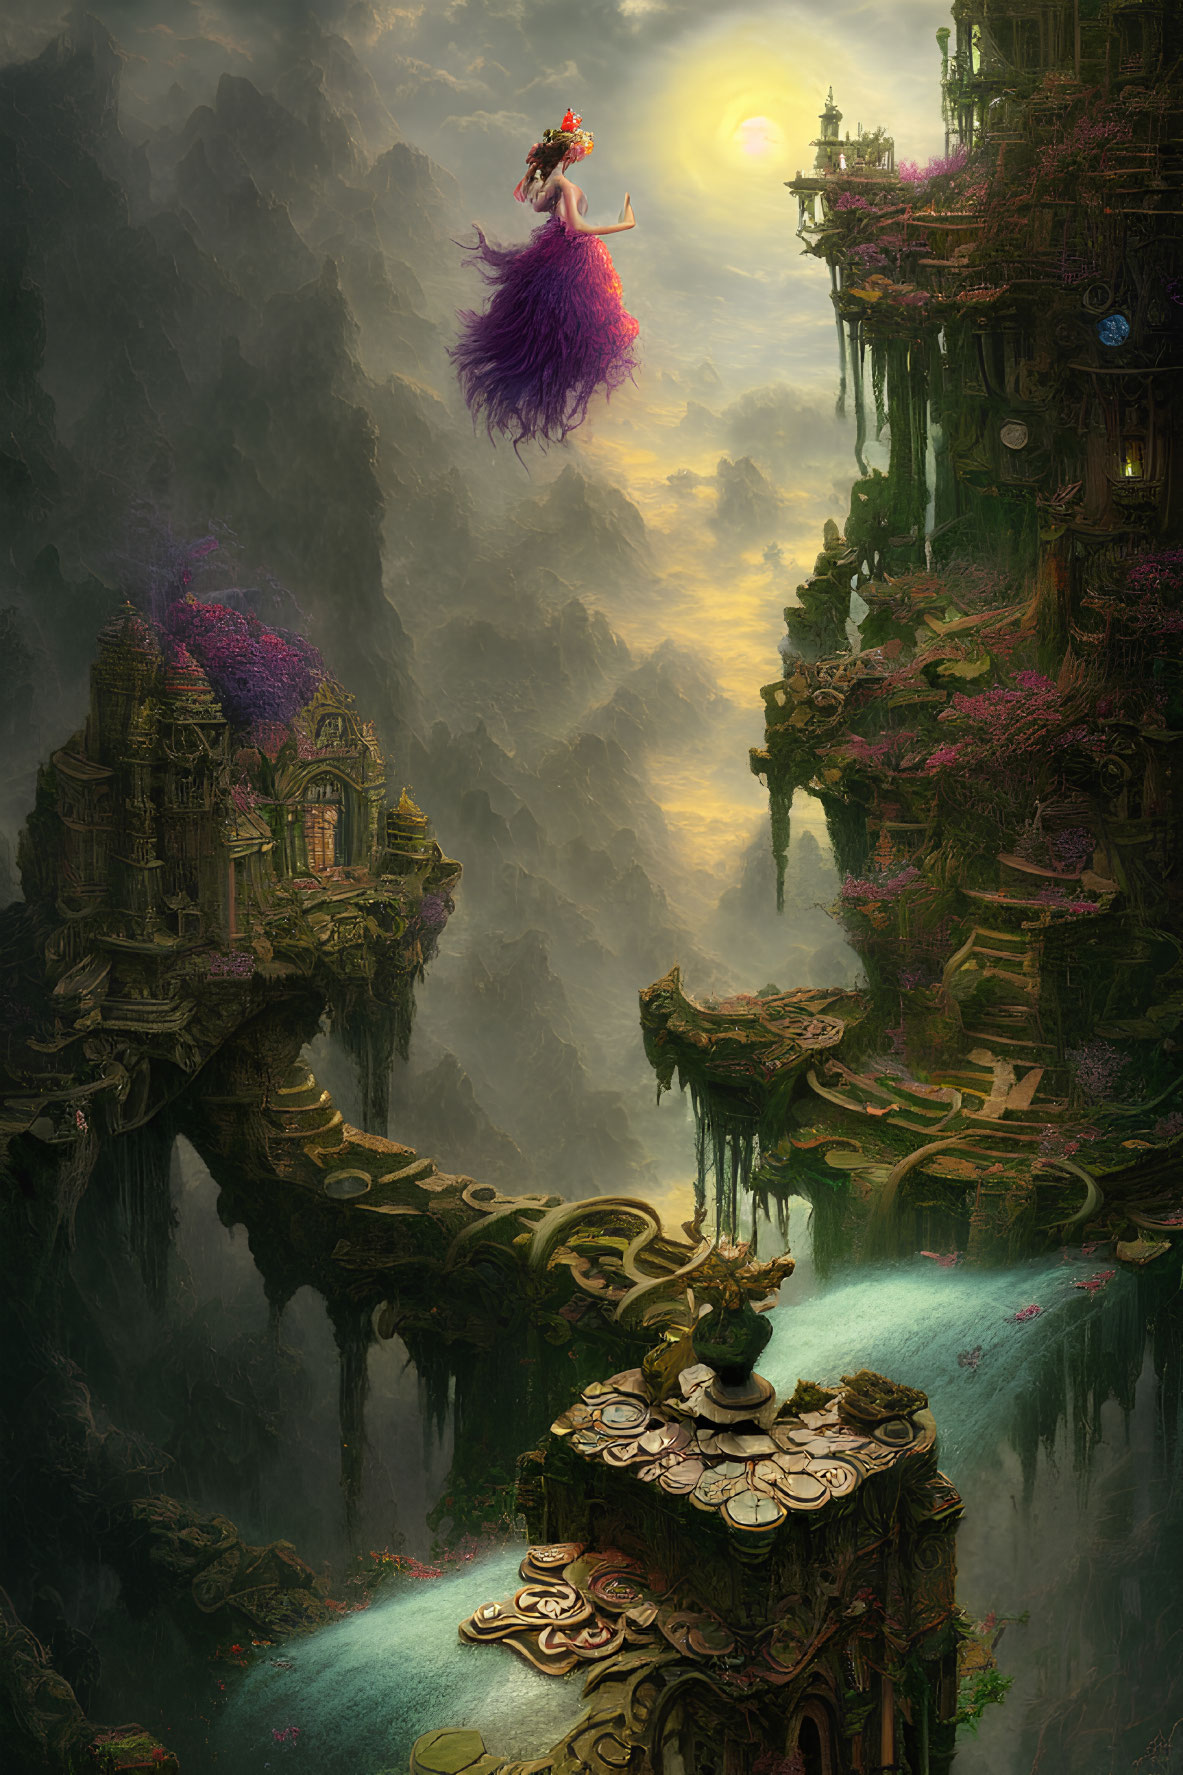 Fantastical landscape with ancient cliffside temples and floating landmass.